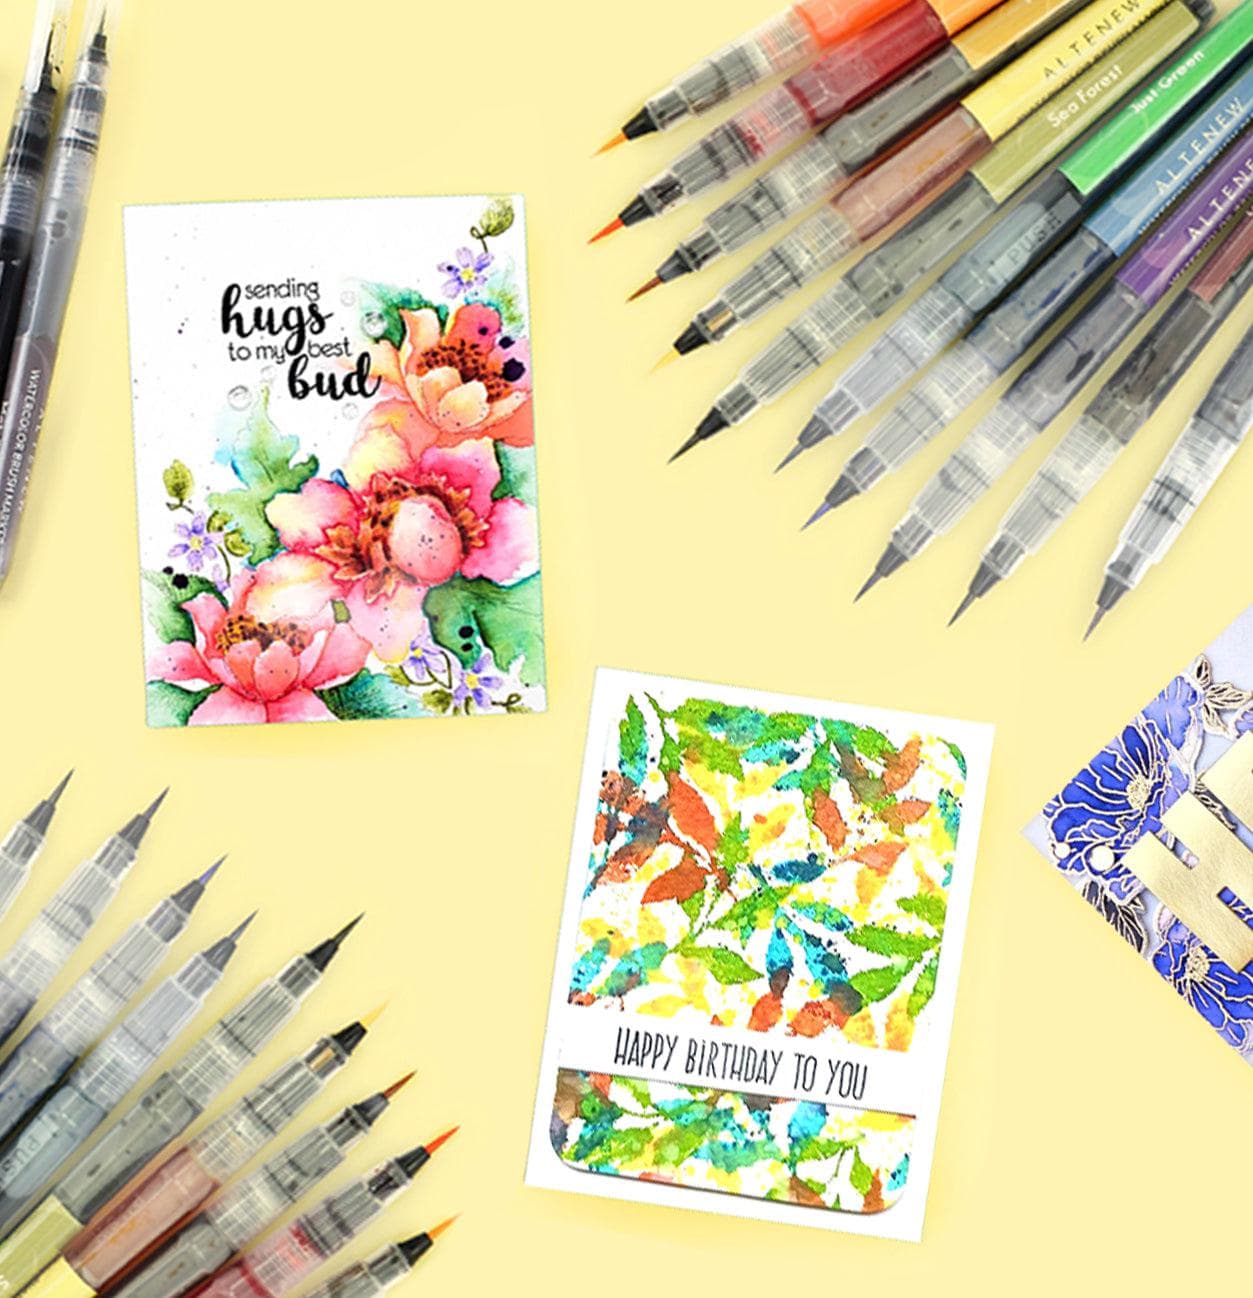 Up To 42% Off on Aen Art Watercolor Real Brush